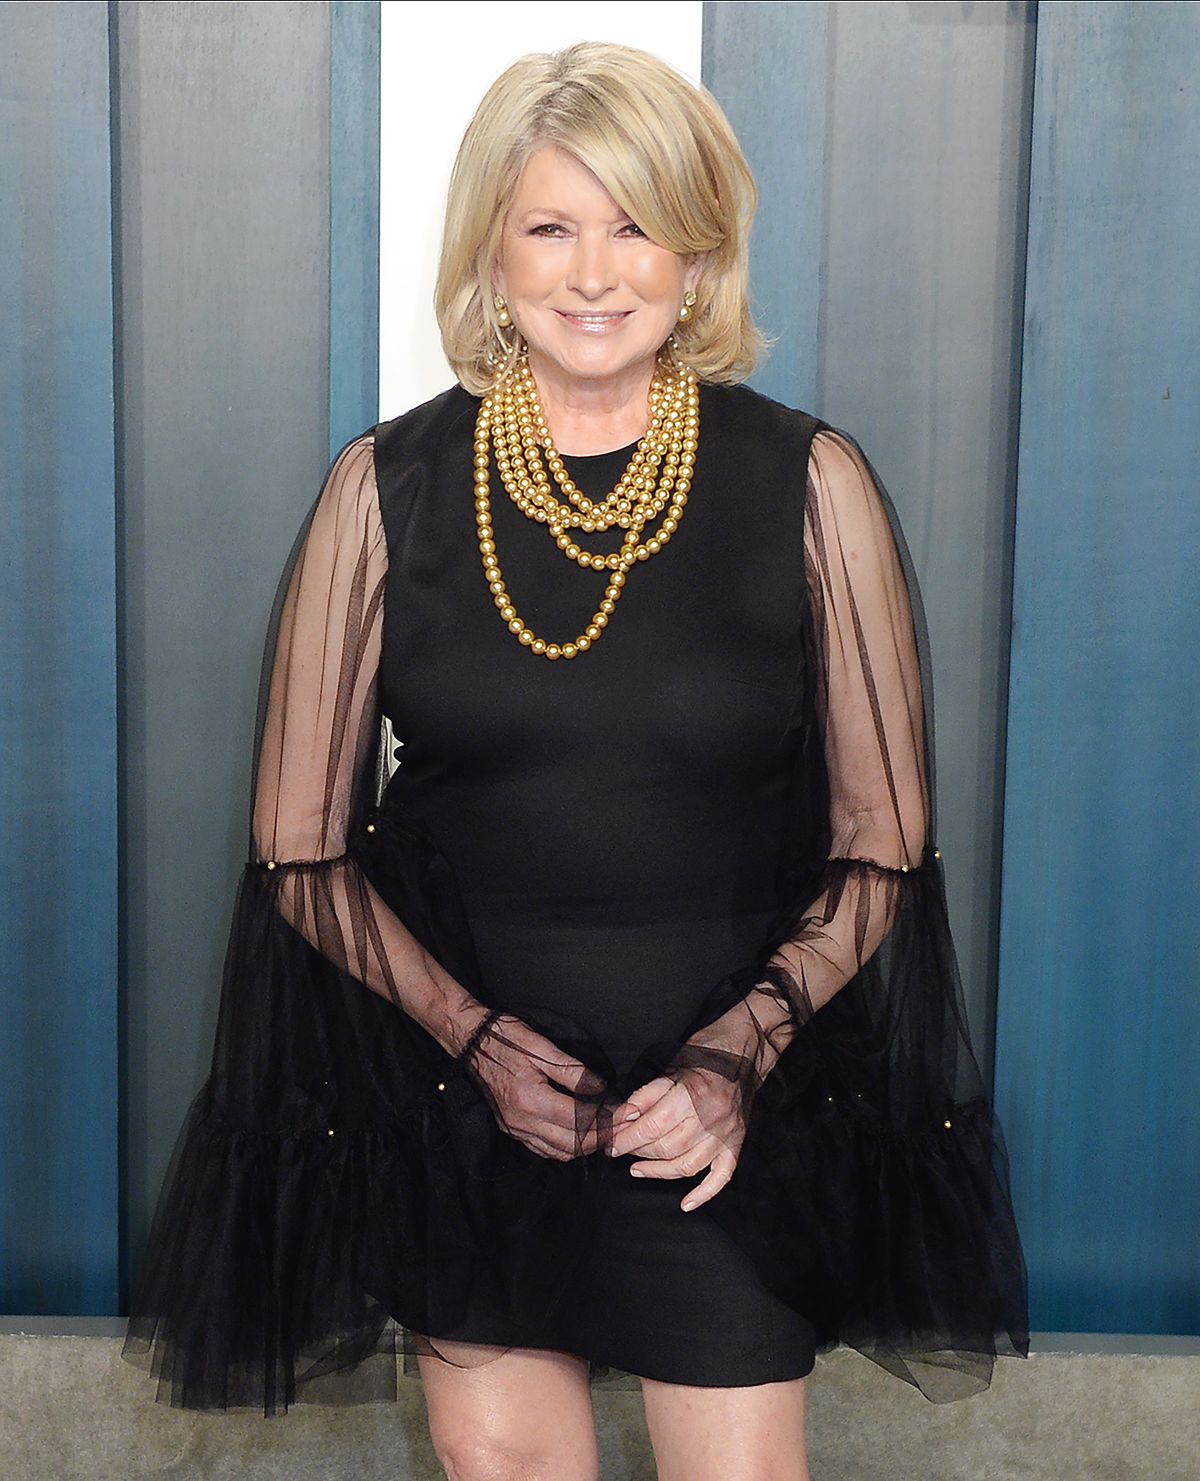 Collection 90+ Images recent pictures of martha stewart Sharp